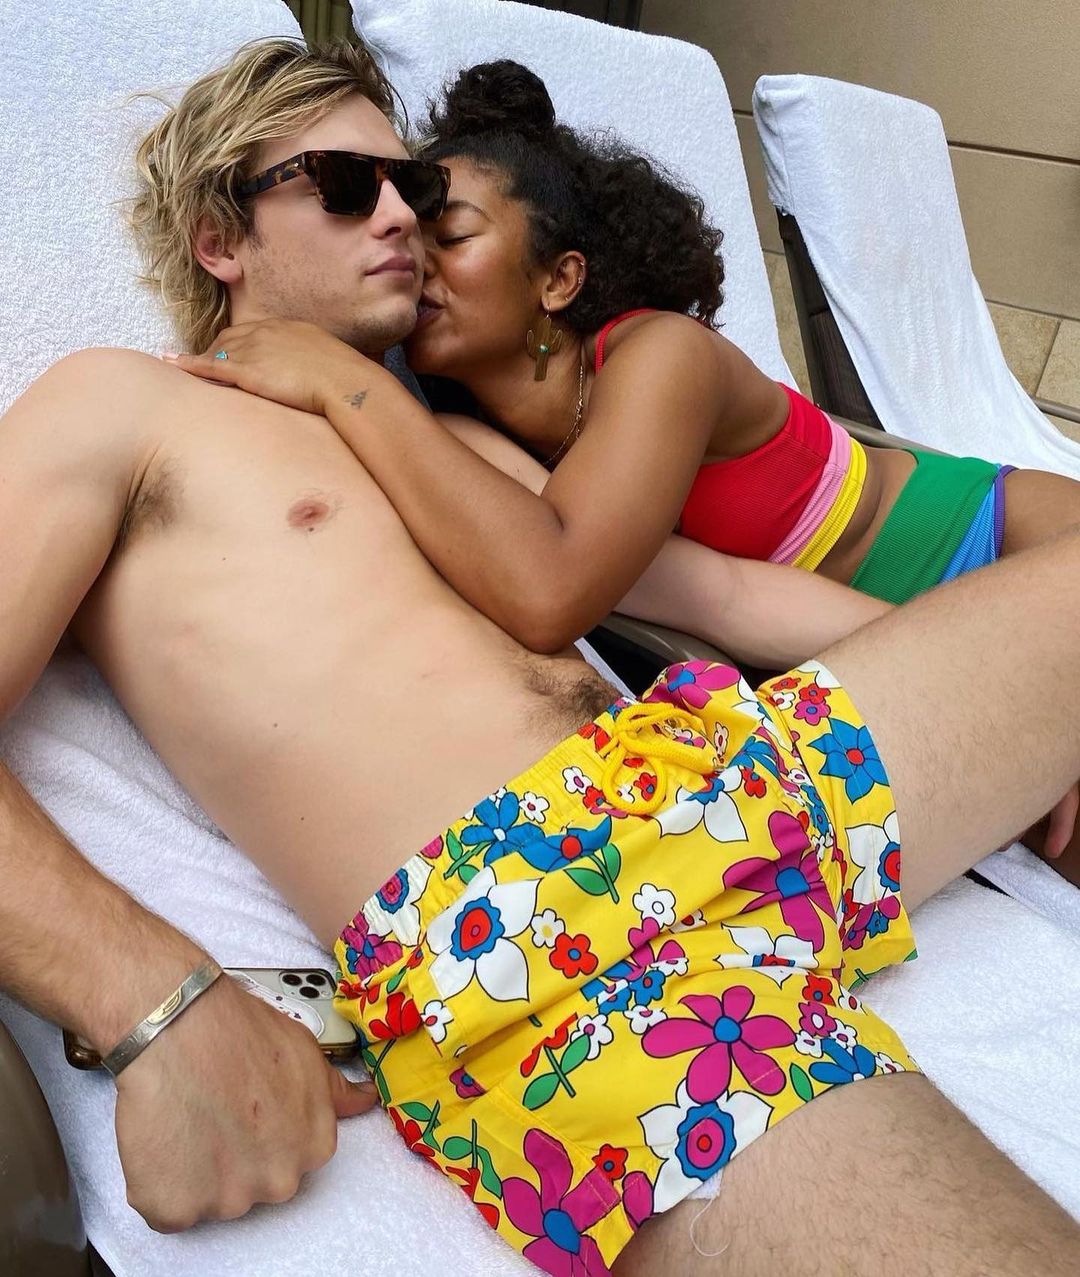 Ross Lynch shirtless vacation pics with his girlfriend and family.